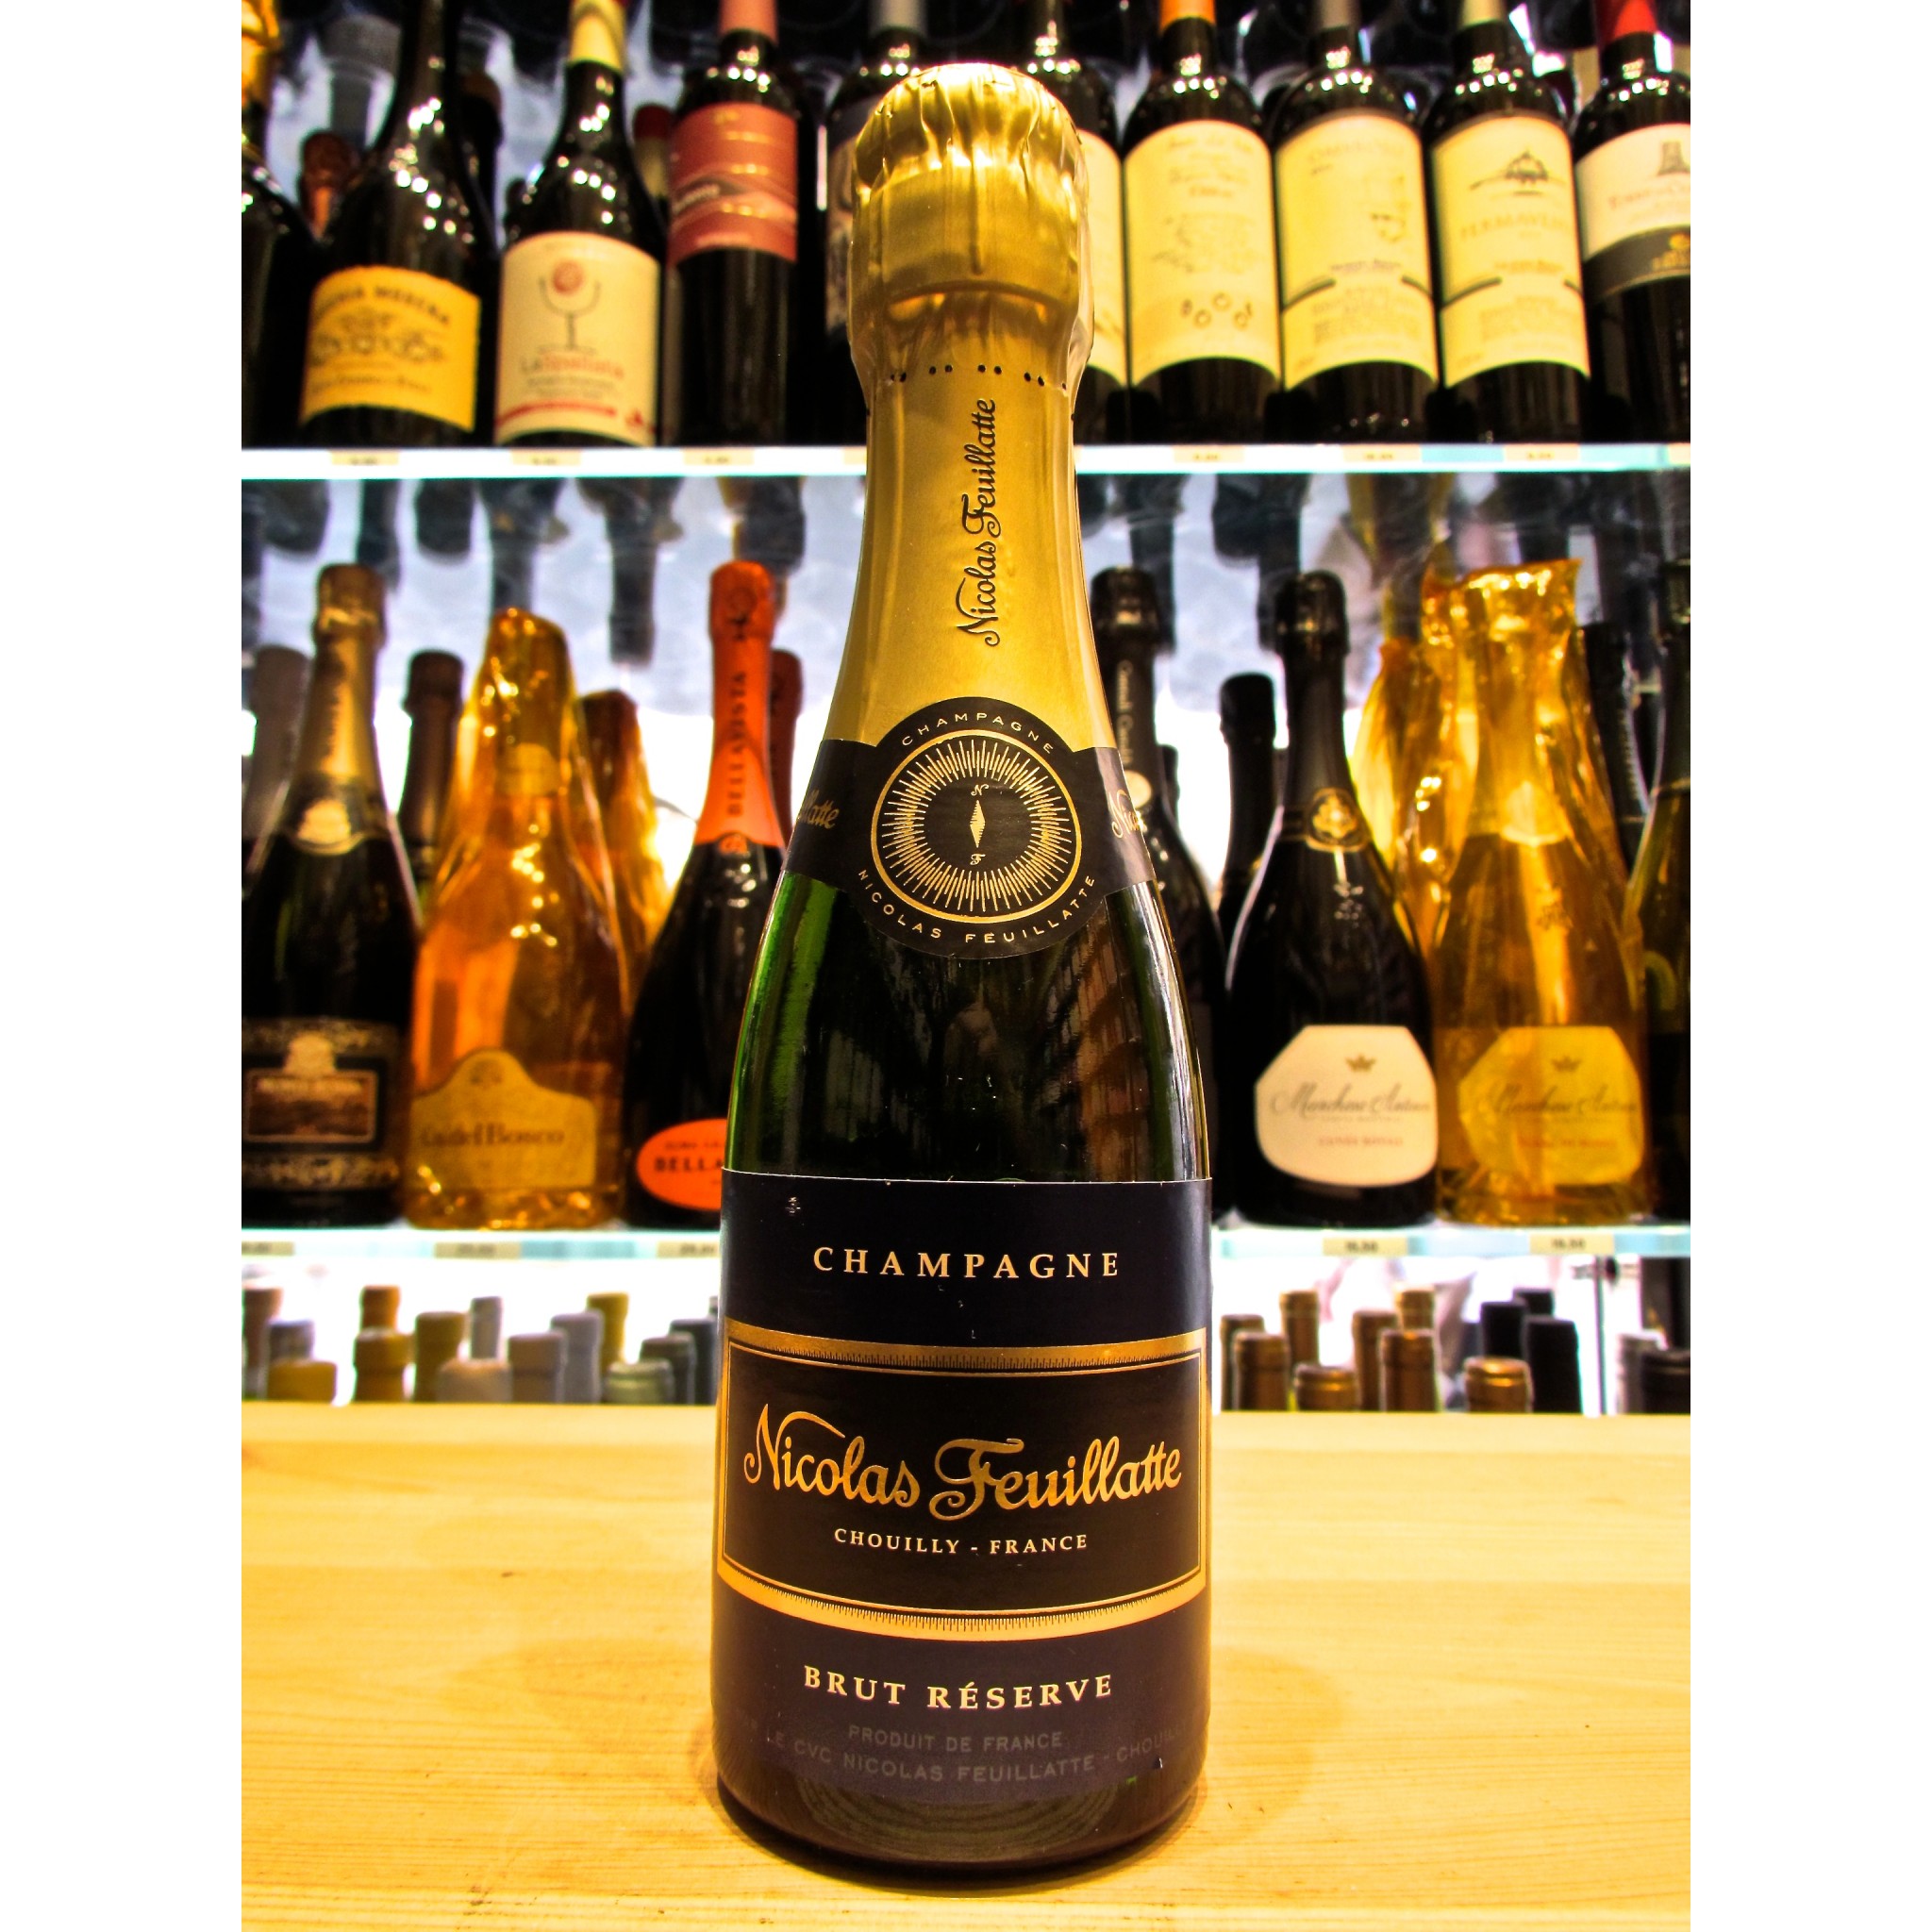 Feuillatte best Online Brut price French Nicolas quality sale at champagne the Réserve. shop Champagne Online